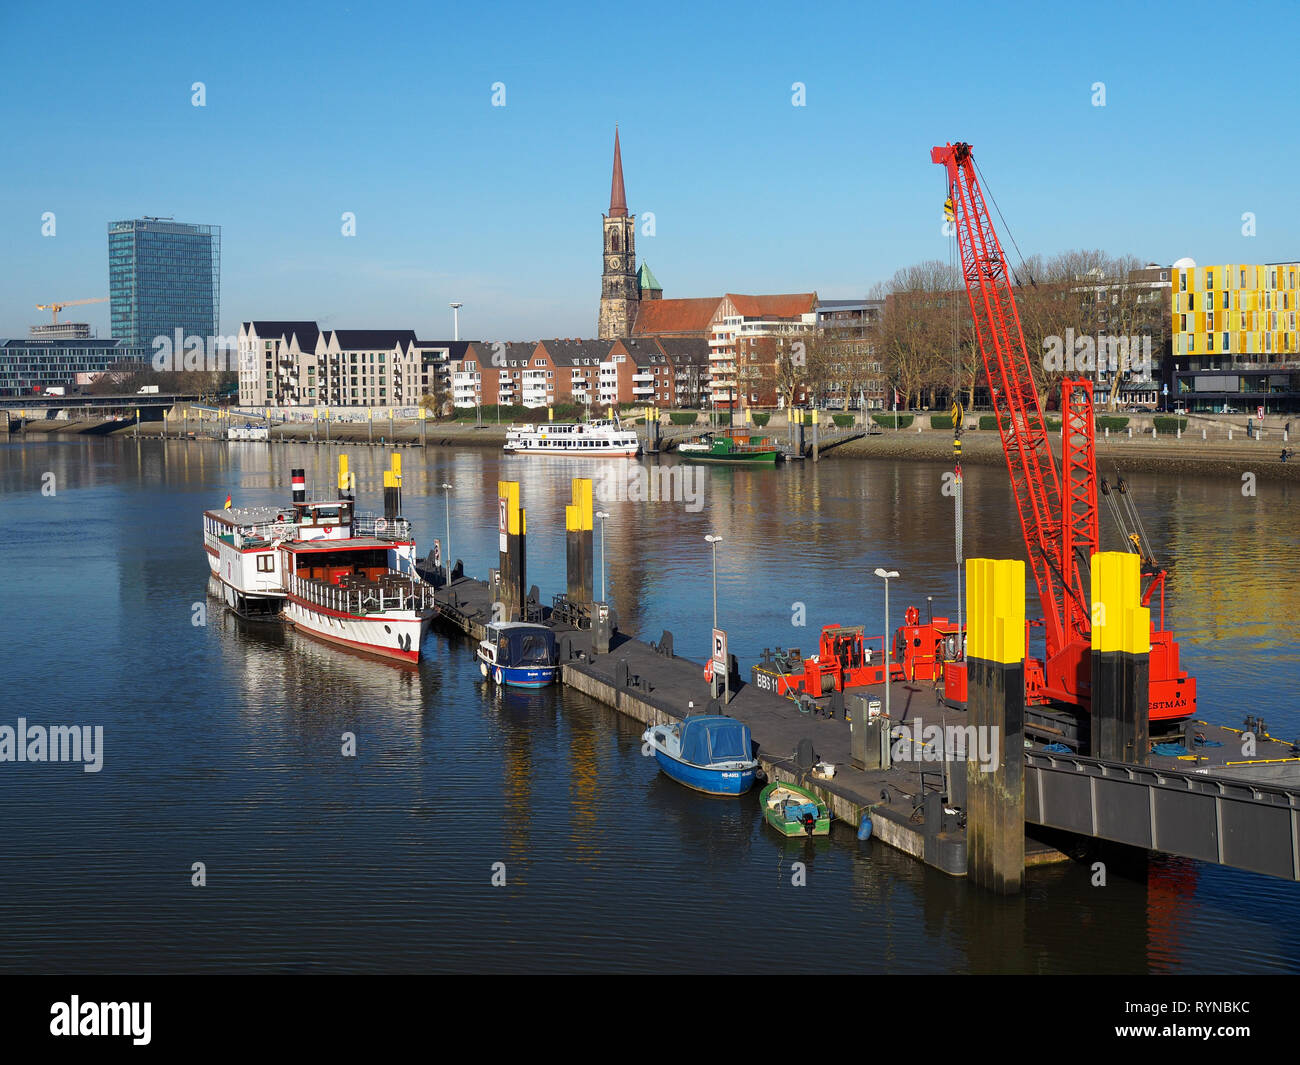 Bremen, Germany - February 14th, 2019 - Pier with several small vessels and bright red floating crane and city skyline with Weser Tower and St, Stepha Stock Photo